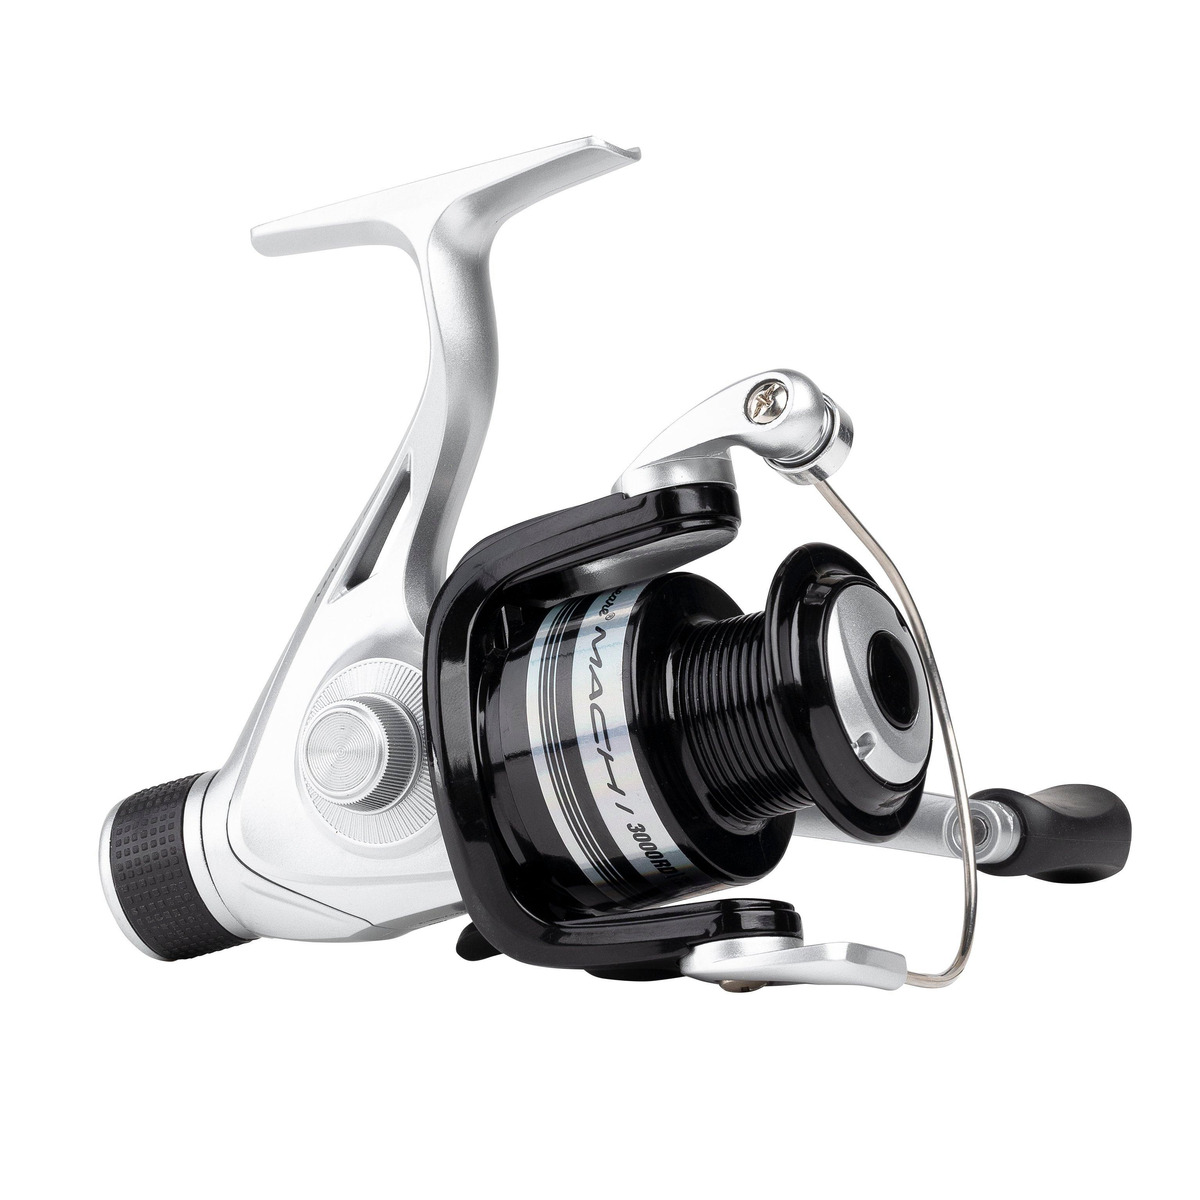 Shakespeare Mach 1 Spinning Reel Rd - 40 RD